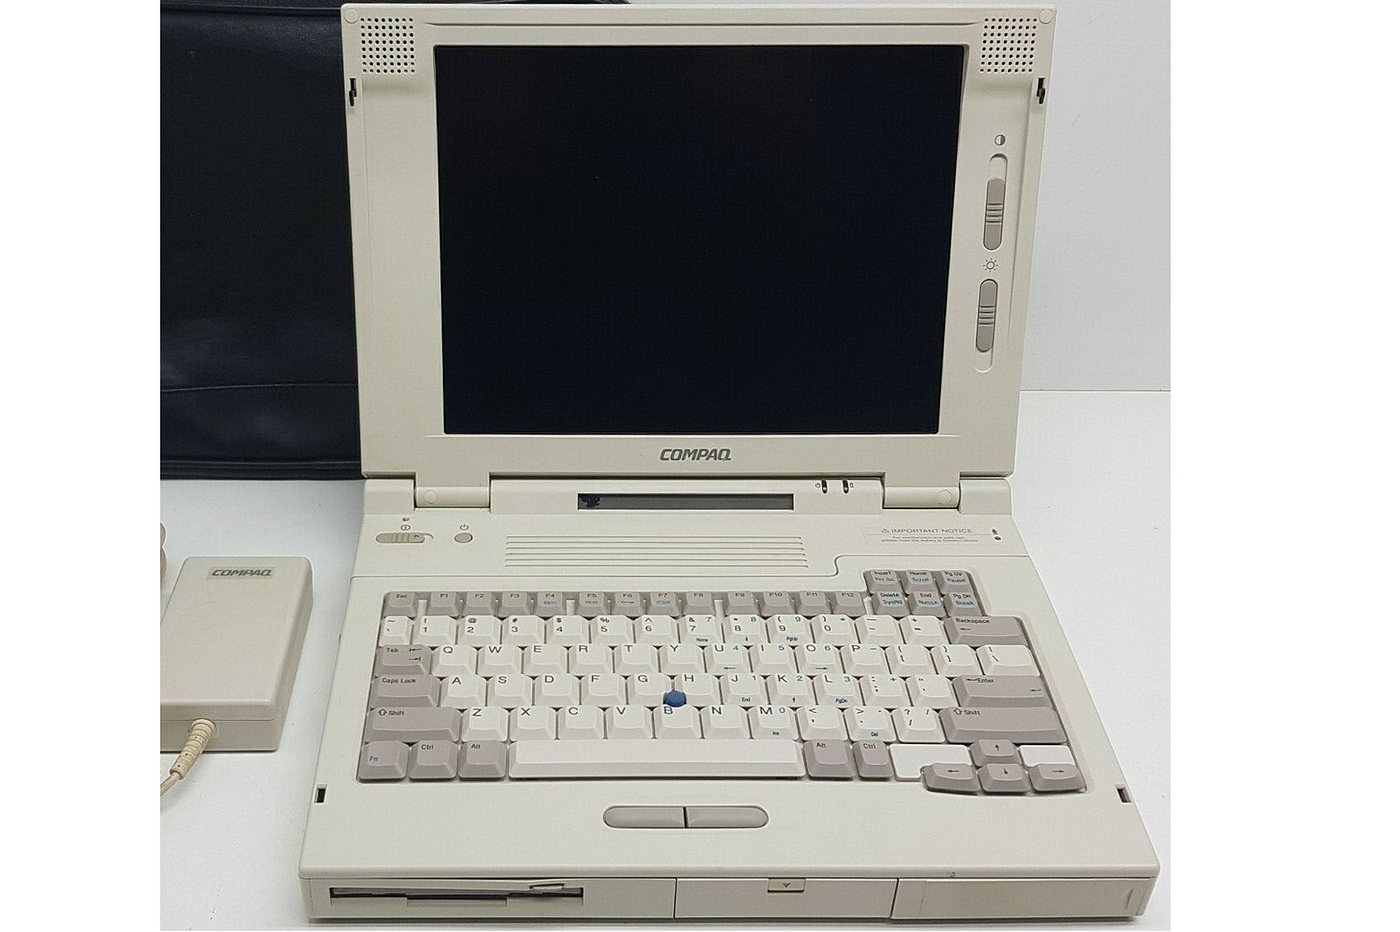 Restoration and use of the vintage $5,000 Compaq LTE laptop from 1997 | by  Dmitrii Eliuseev | Geek Culture | Medium